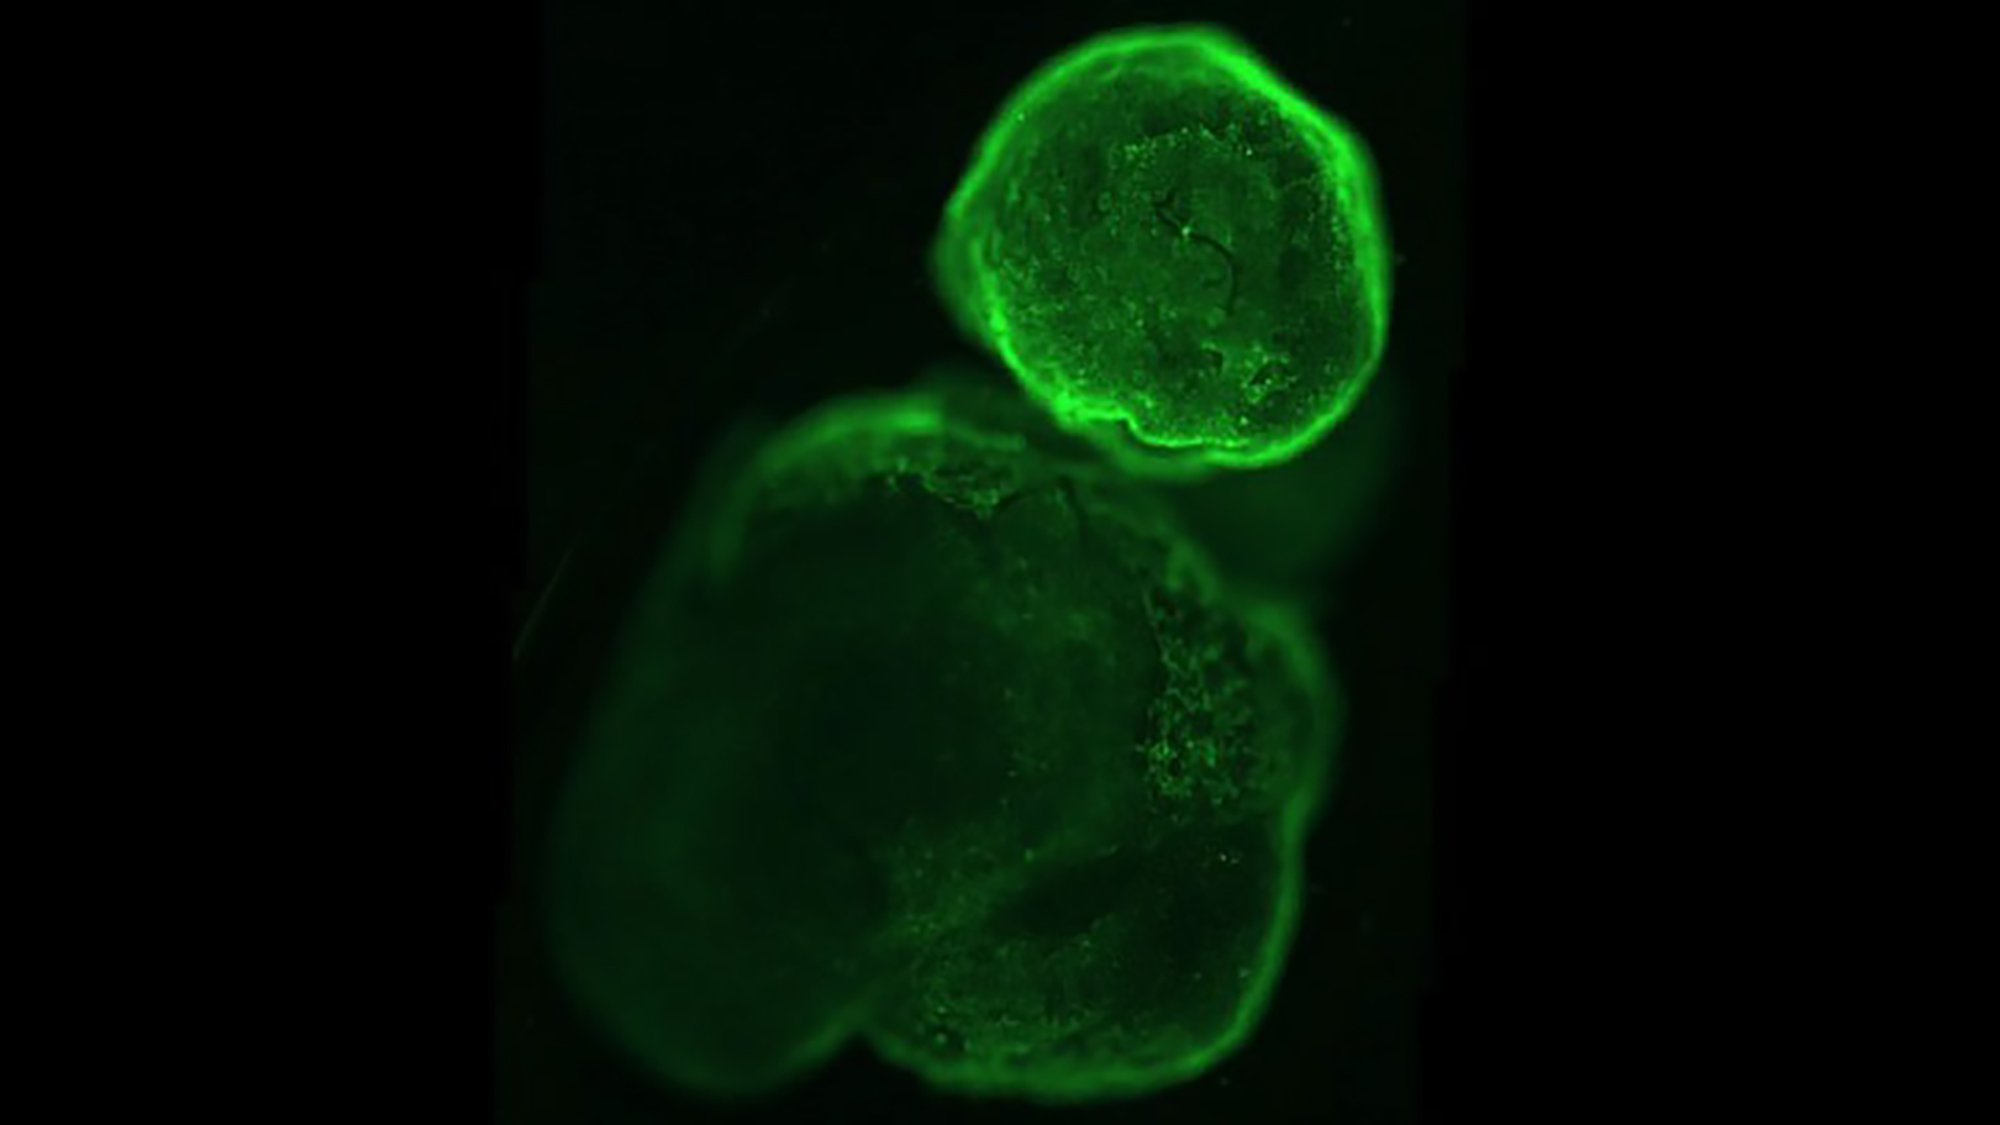 Organoid images will be key to studying the effect of infection. Image by Sandra Acosta, IBE.